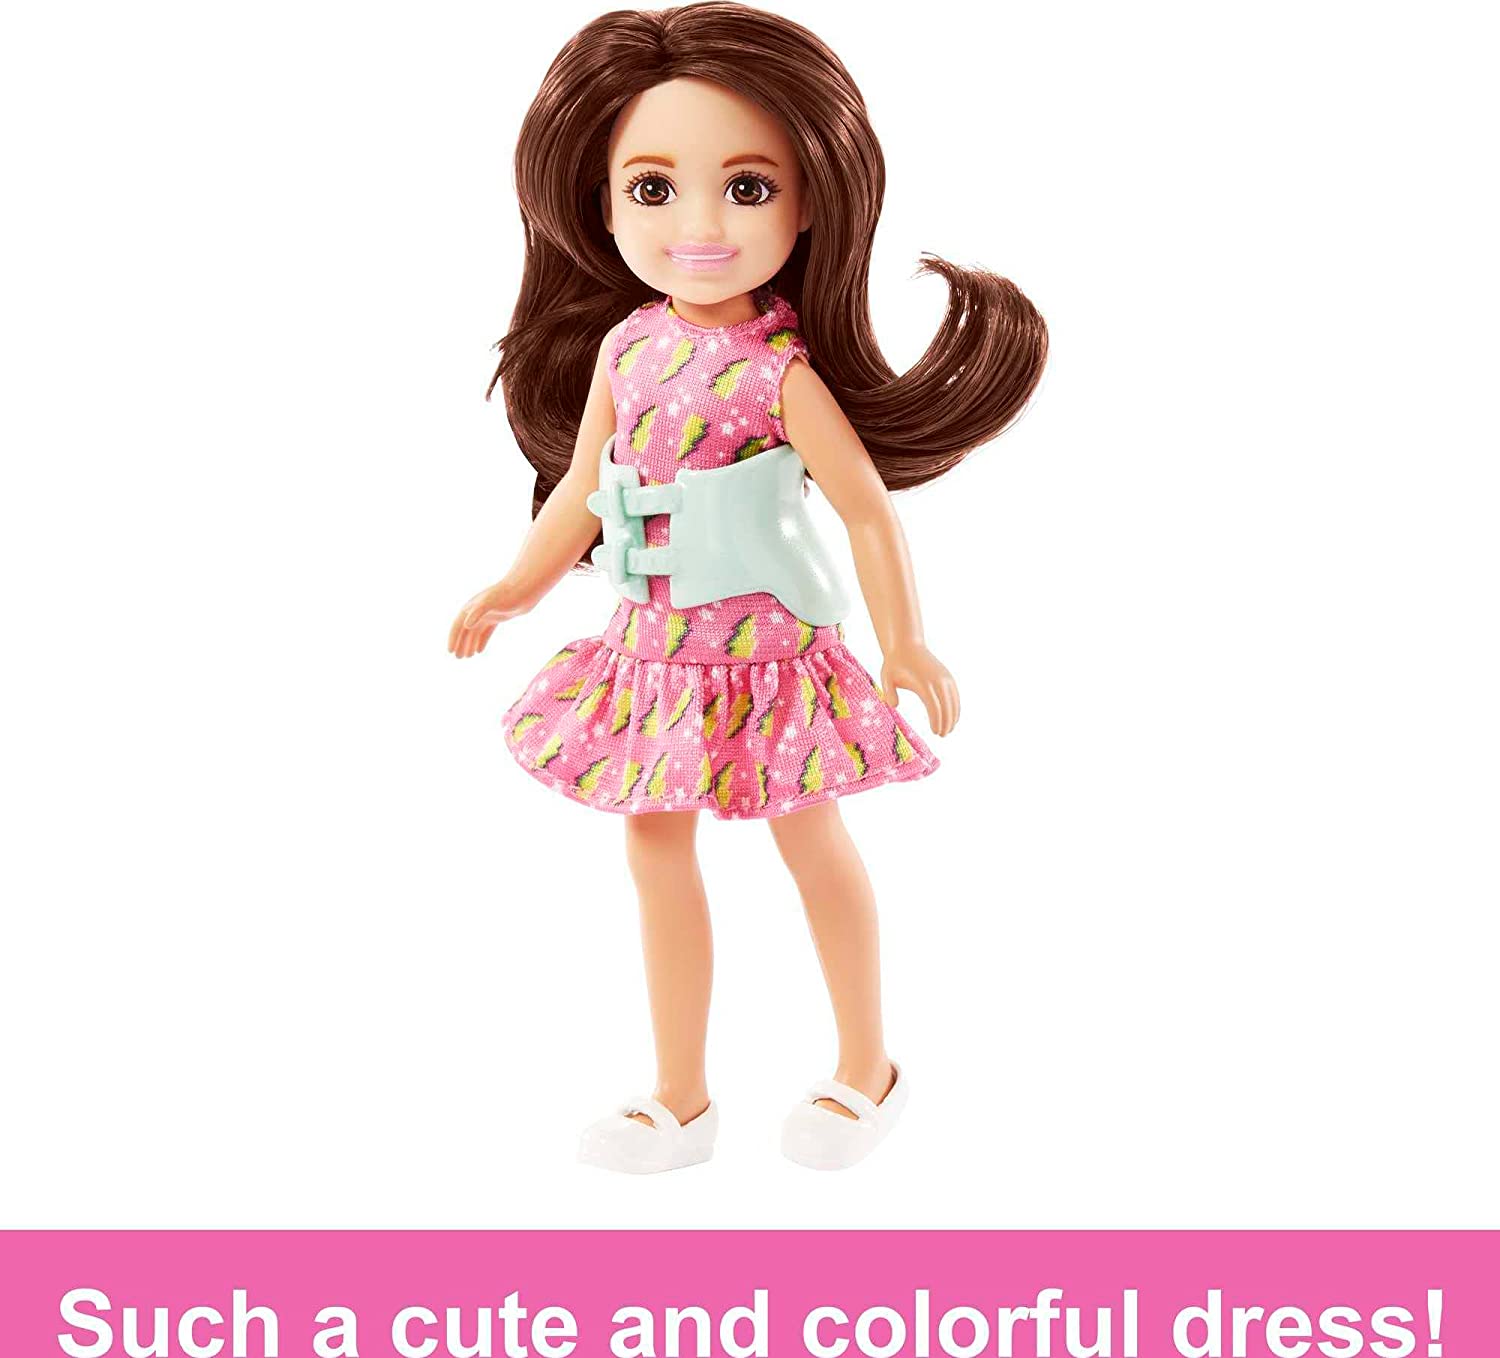 Barbie Chelsea 6 Inch Doll Brunette with Brace Wearing Pink Lightning Bolt Dress for Kids Ages 3 Years Old & Up